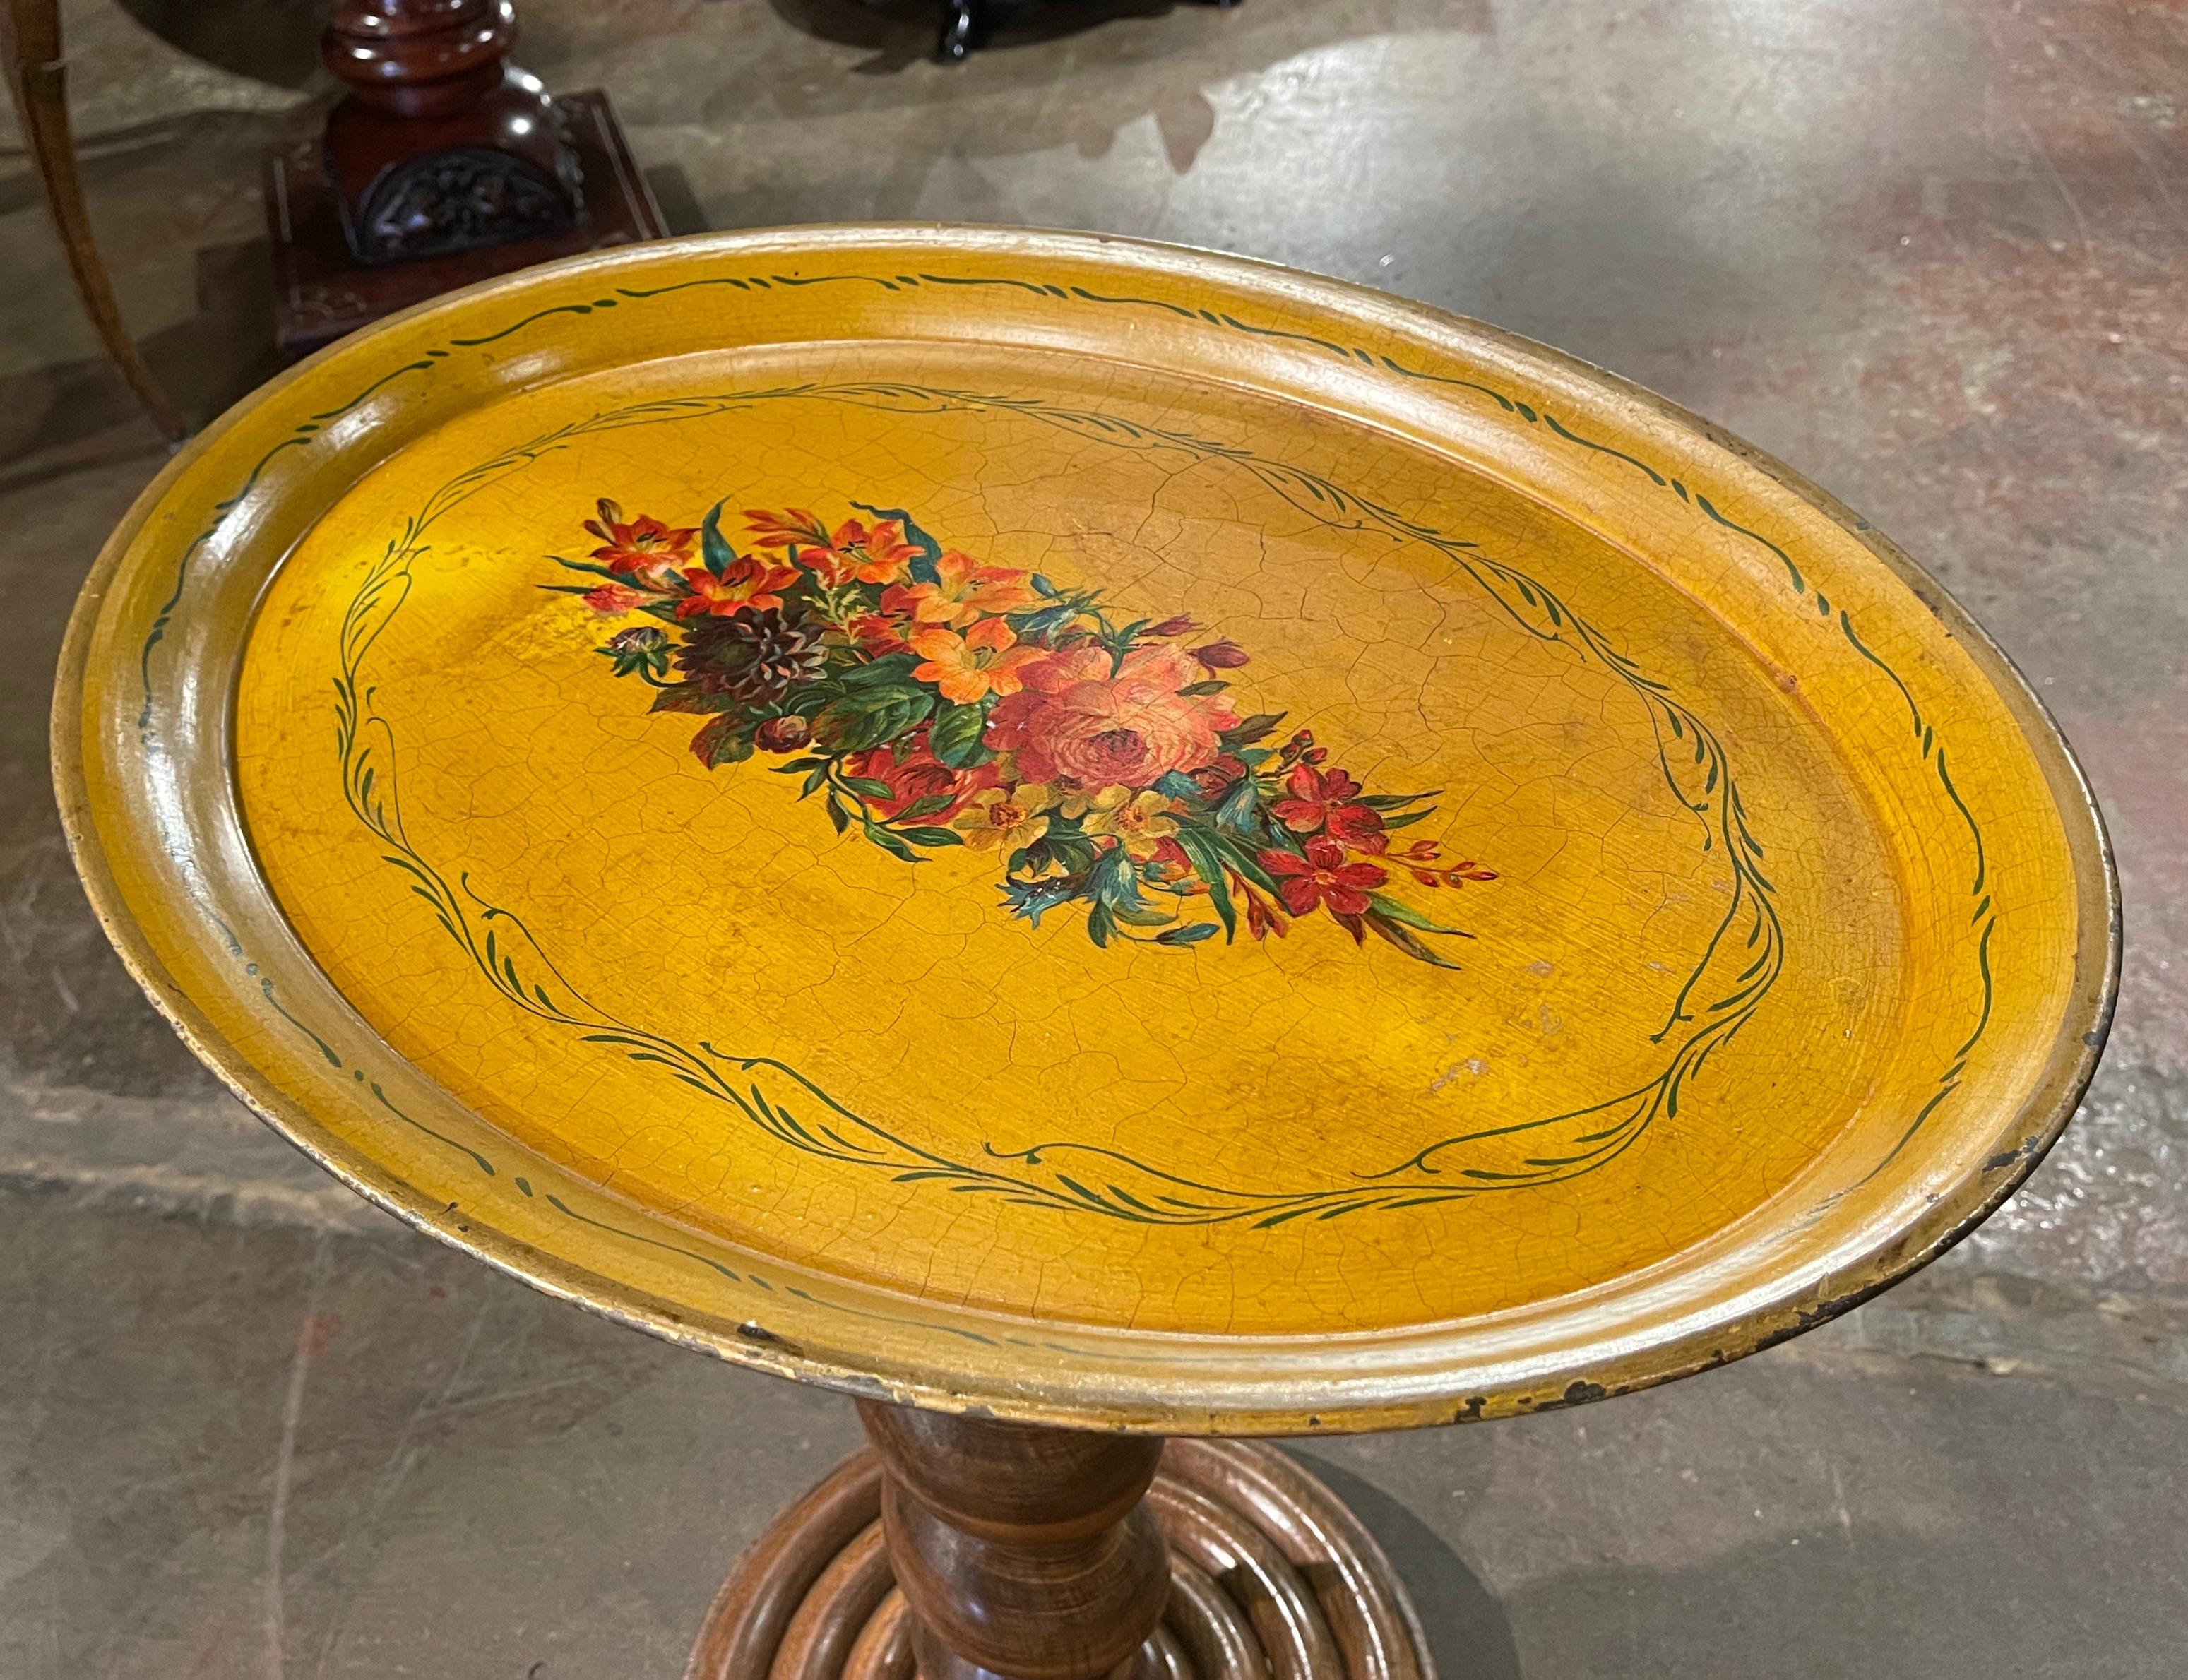 Place this elegant antique tole tray on a coffee table or hang it on a wall. Crafted in France, circa 1870, and oval in shape, the colorful platter is decorated with a hand painted center medallion featuring floral motifs; it is further embellished